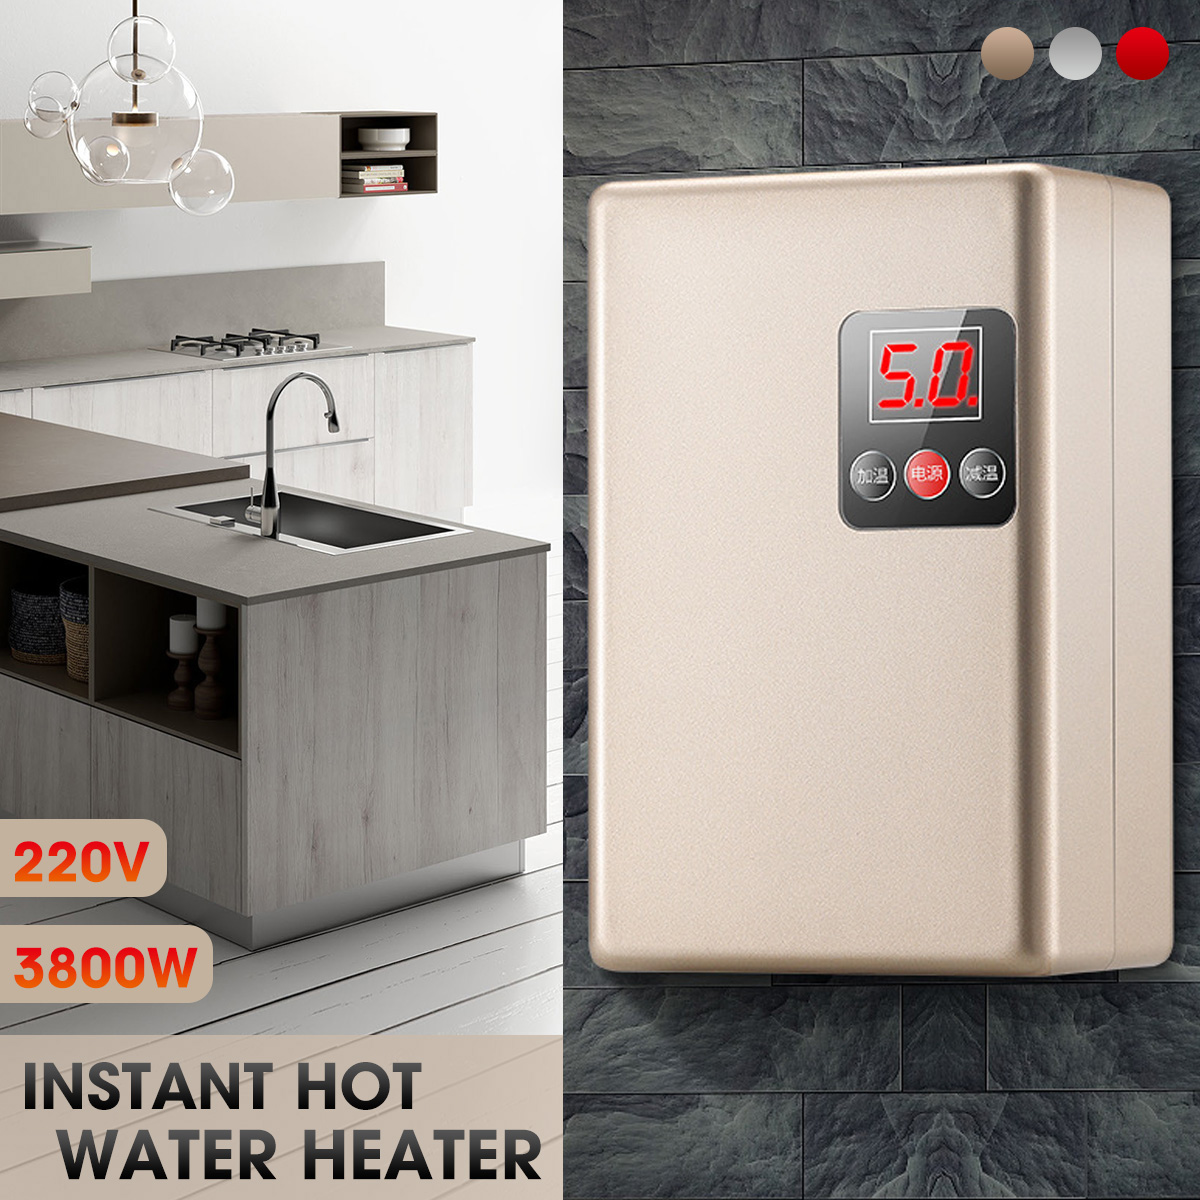 220V-3800W-Shower-Instant-Water-Heater-Tankless-Water-Heater-Electric-Heating-Instant-Hot-Water-for--1582848-9